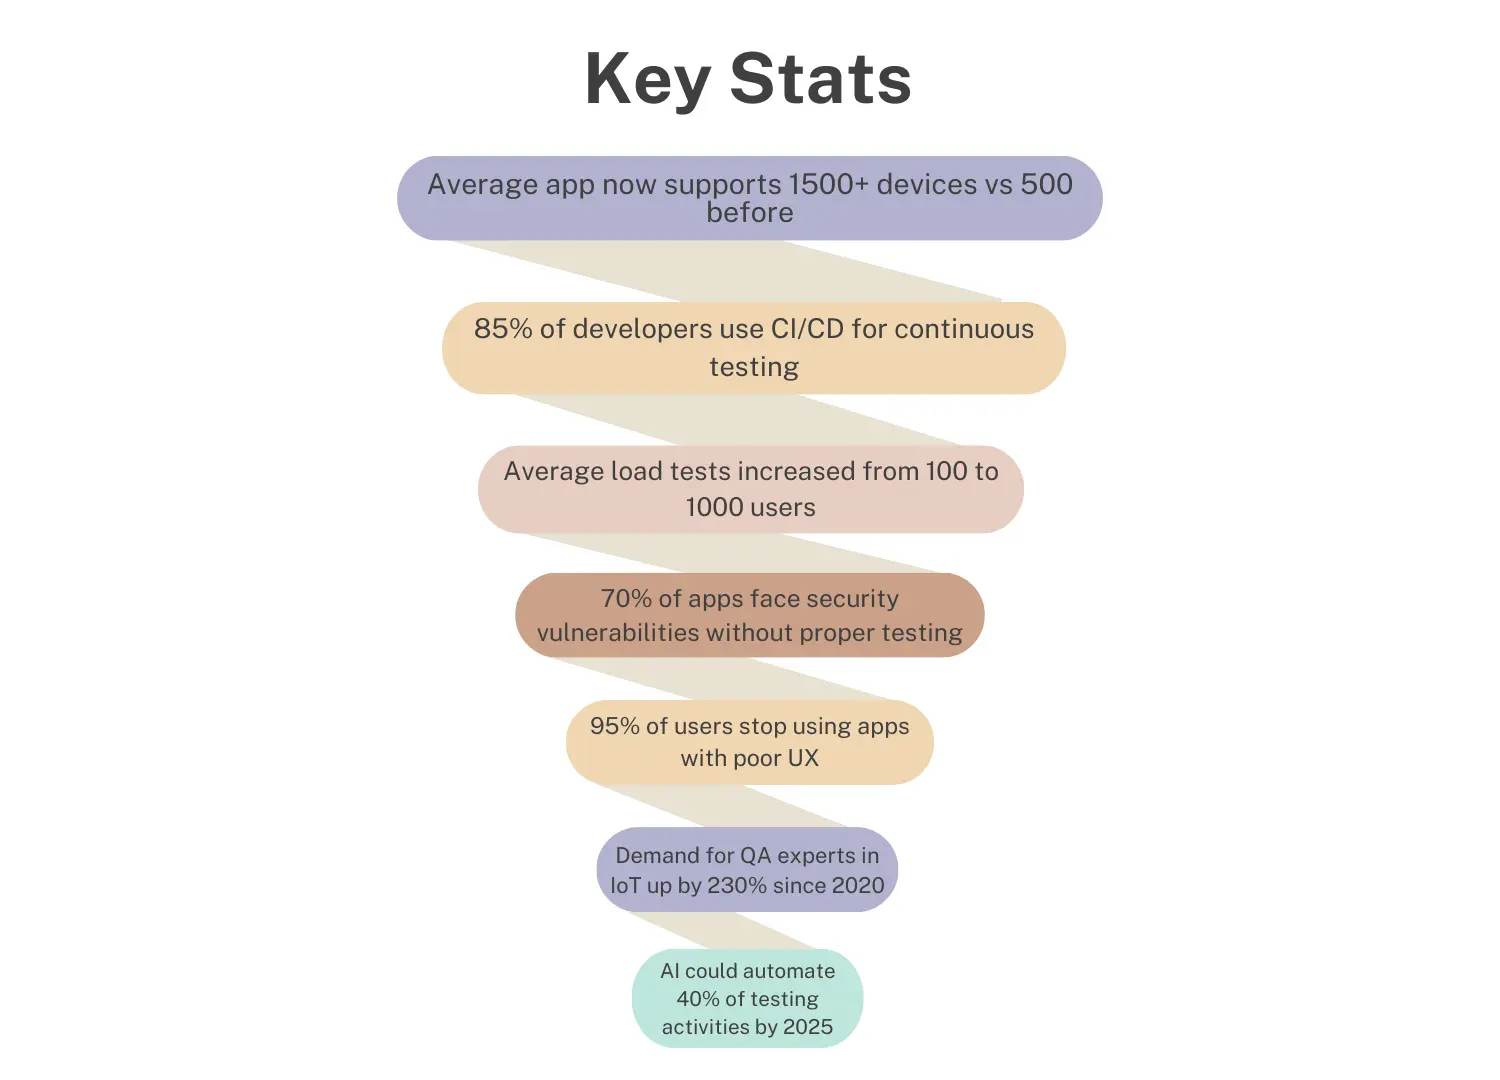 Key Stats of QA and Testing Services